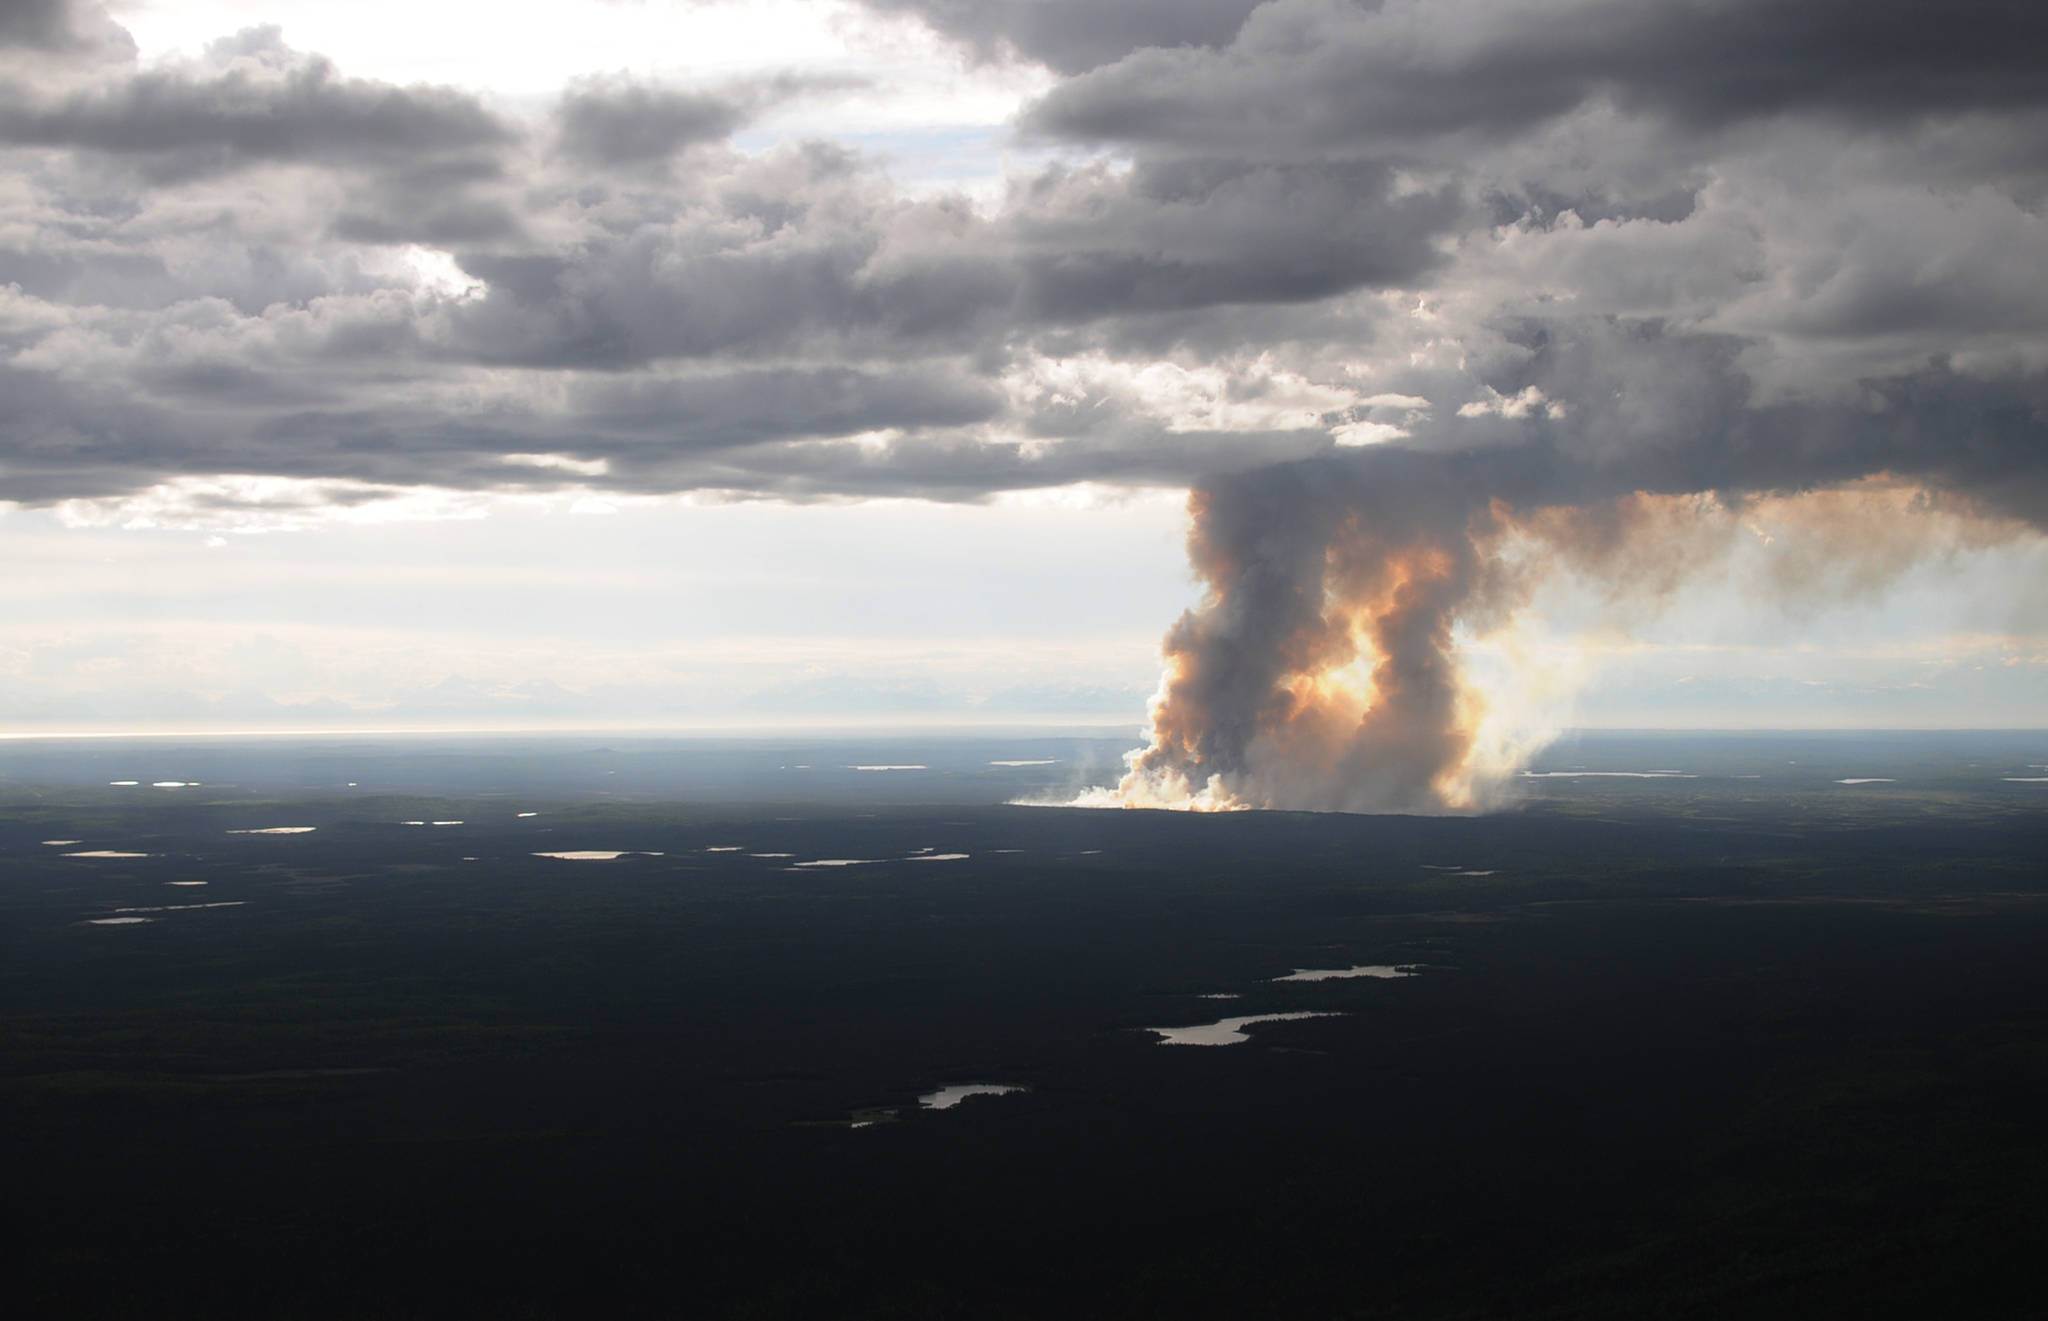 Smoke rises from the burn area of the East Fork Fire on the Kenai National Wildlife Refuge on Friday, June 16, 2017 near Sterling, Alaska. The fire, sparked by dry lightning, had burned about 850 acres by Friday night. (Photo by Elizabeth Earl/Peninsula Clarion)